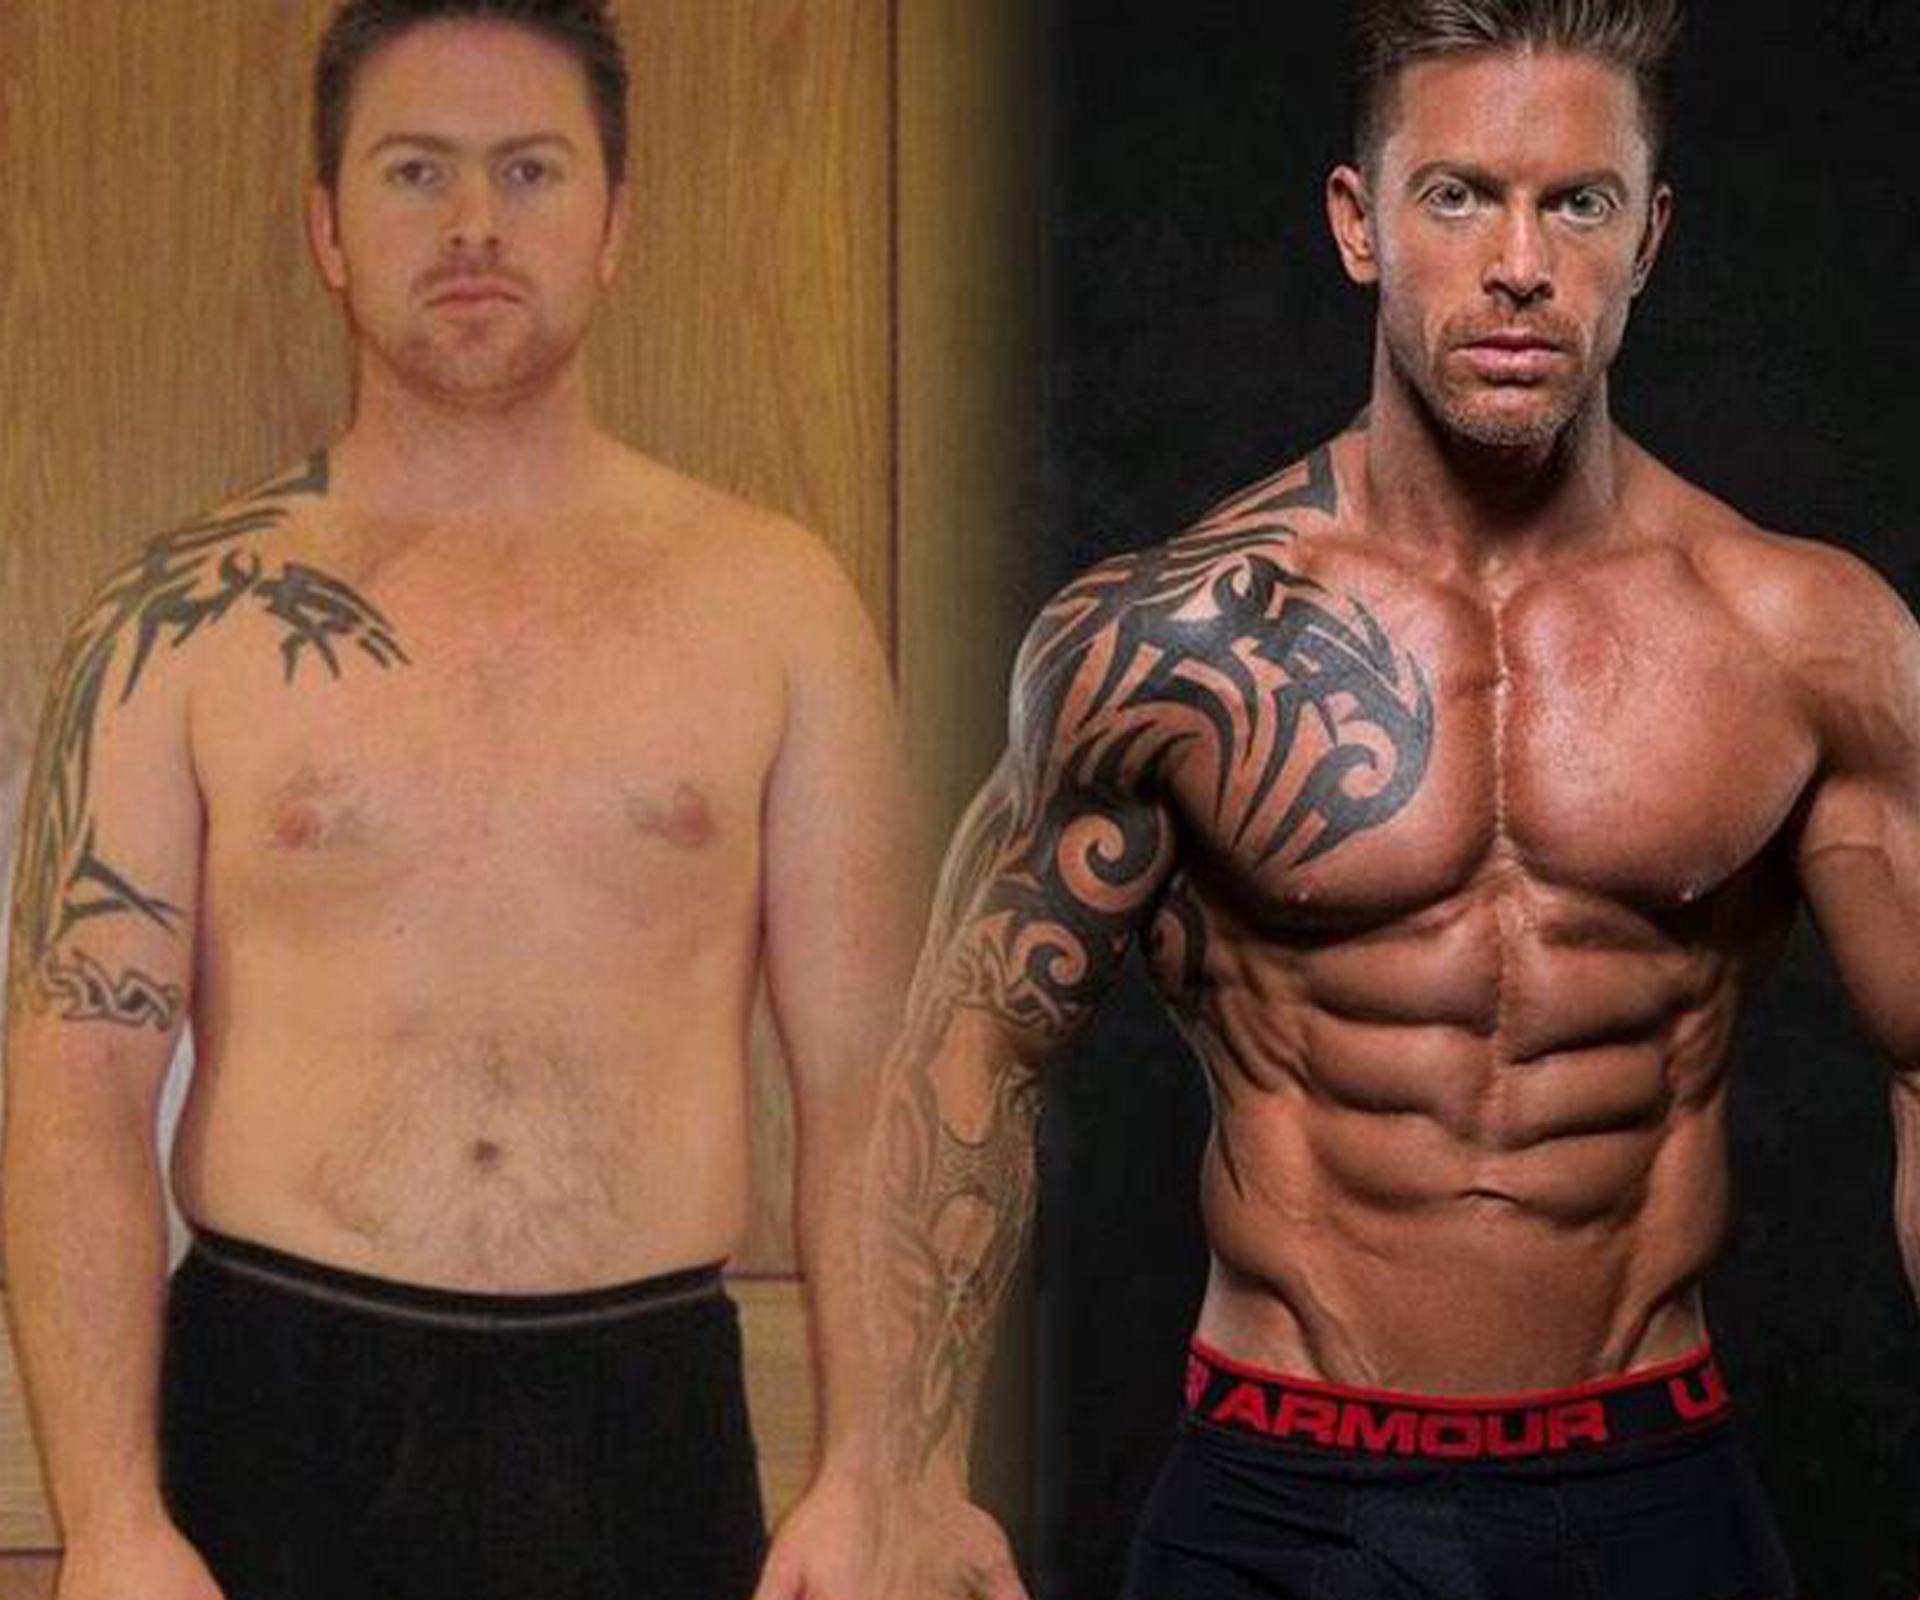 Chubby to chiselled: One man’s 12-week transformation